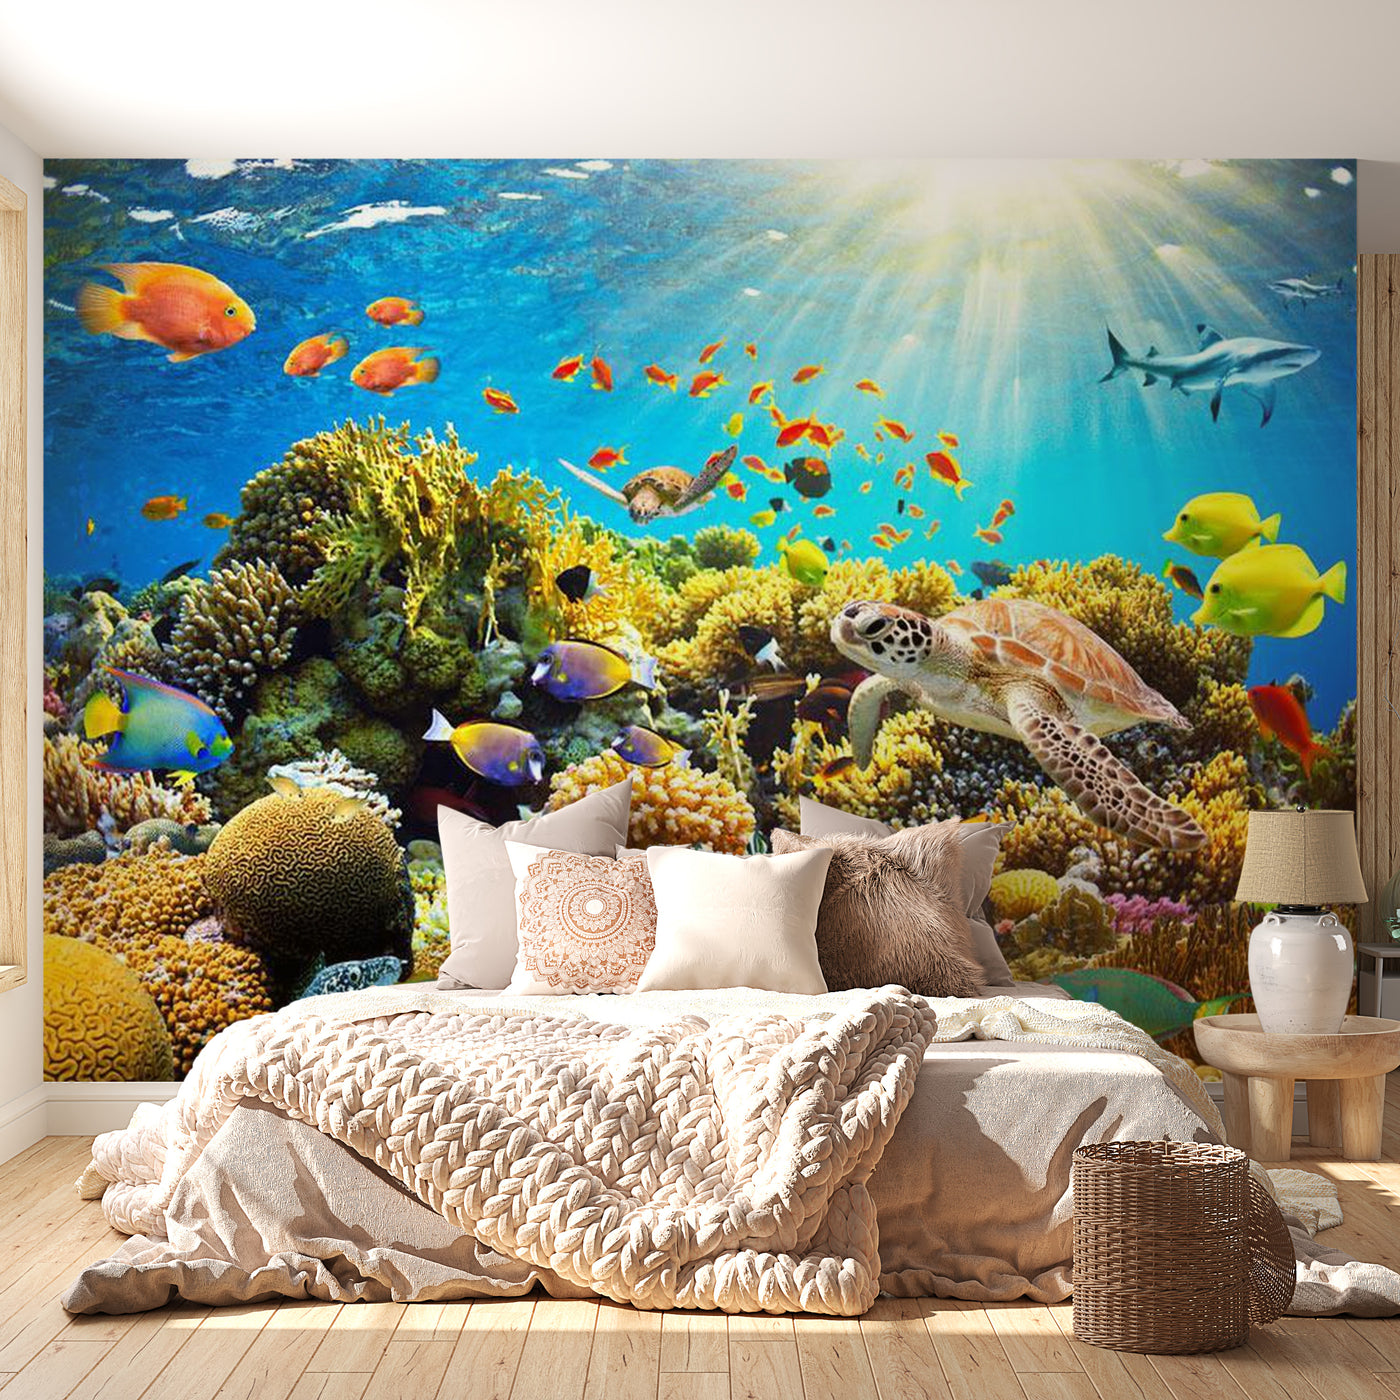 Peel & Stick Tropical Wall Mural - Underwater Land - Removable Wall Decals